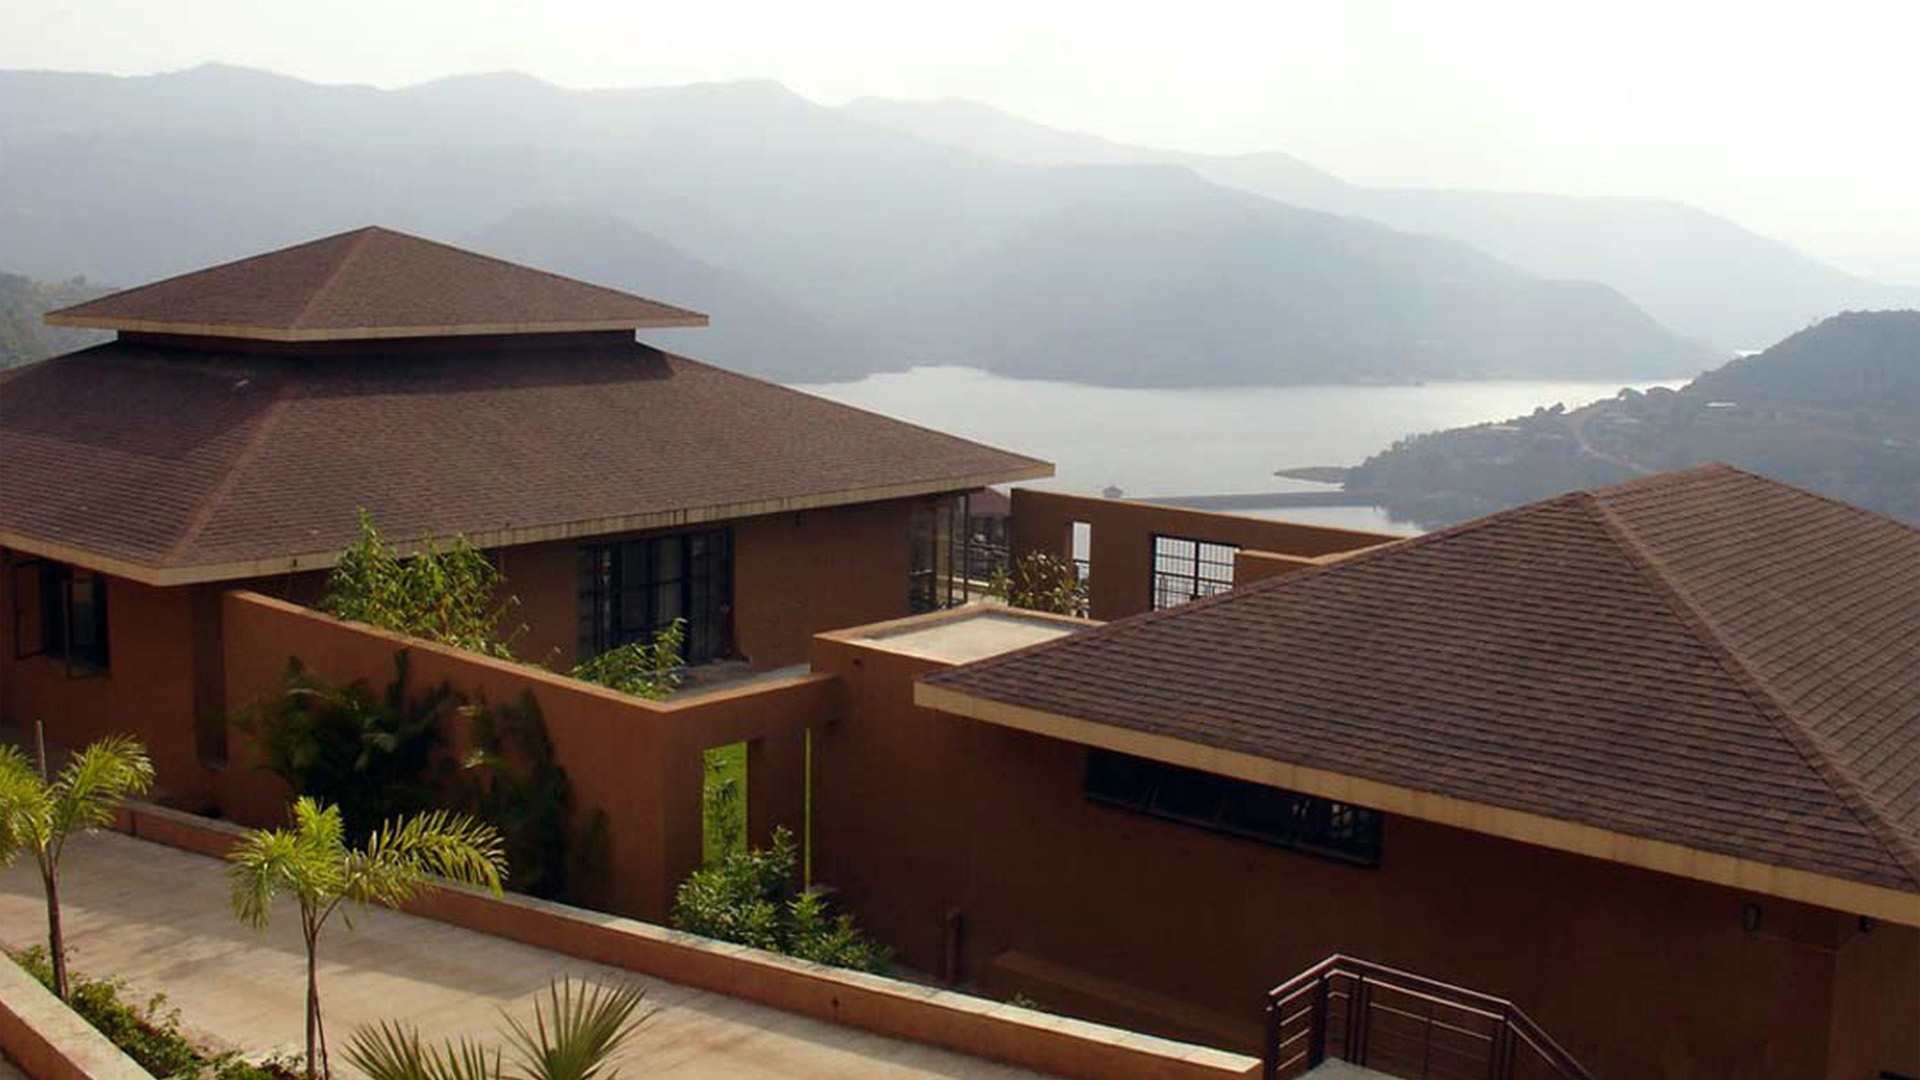 House in the Valley Lavasa